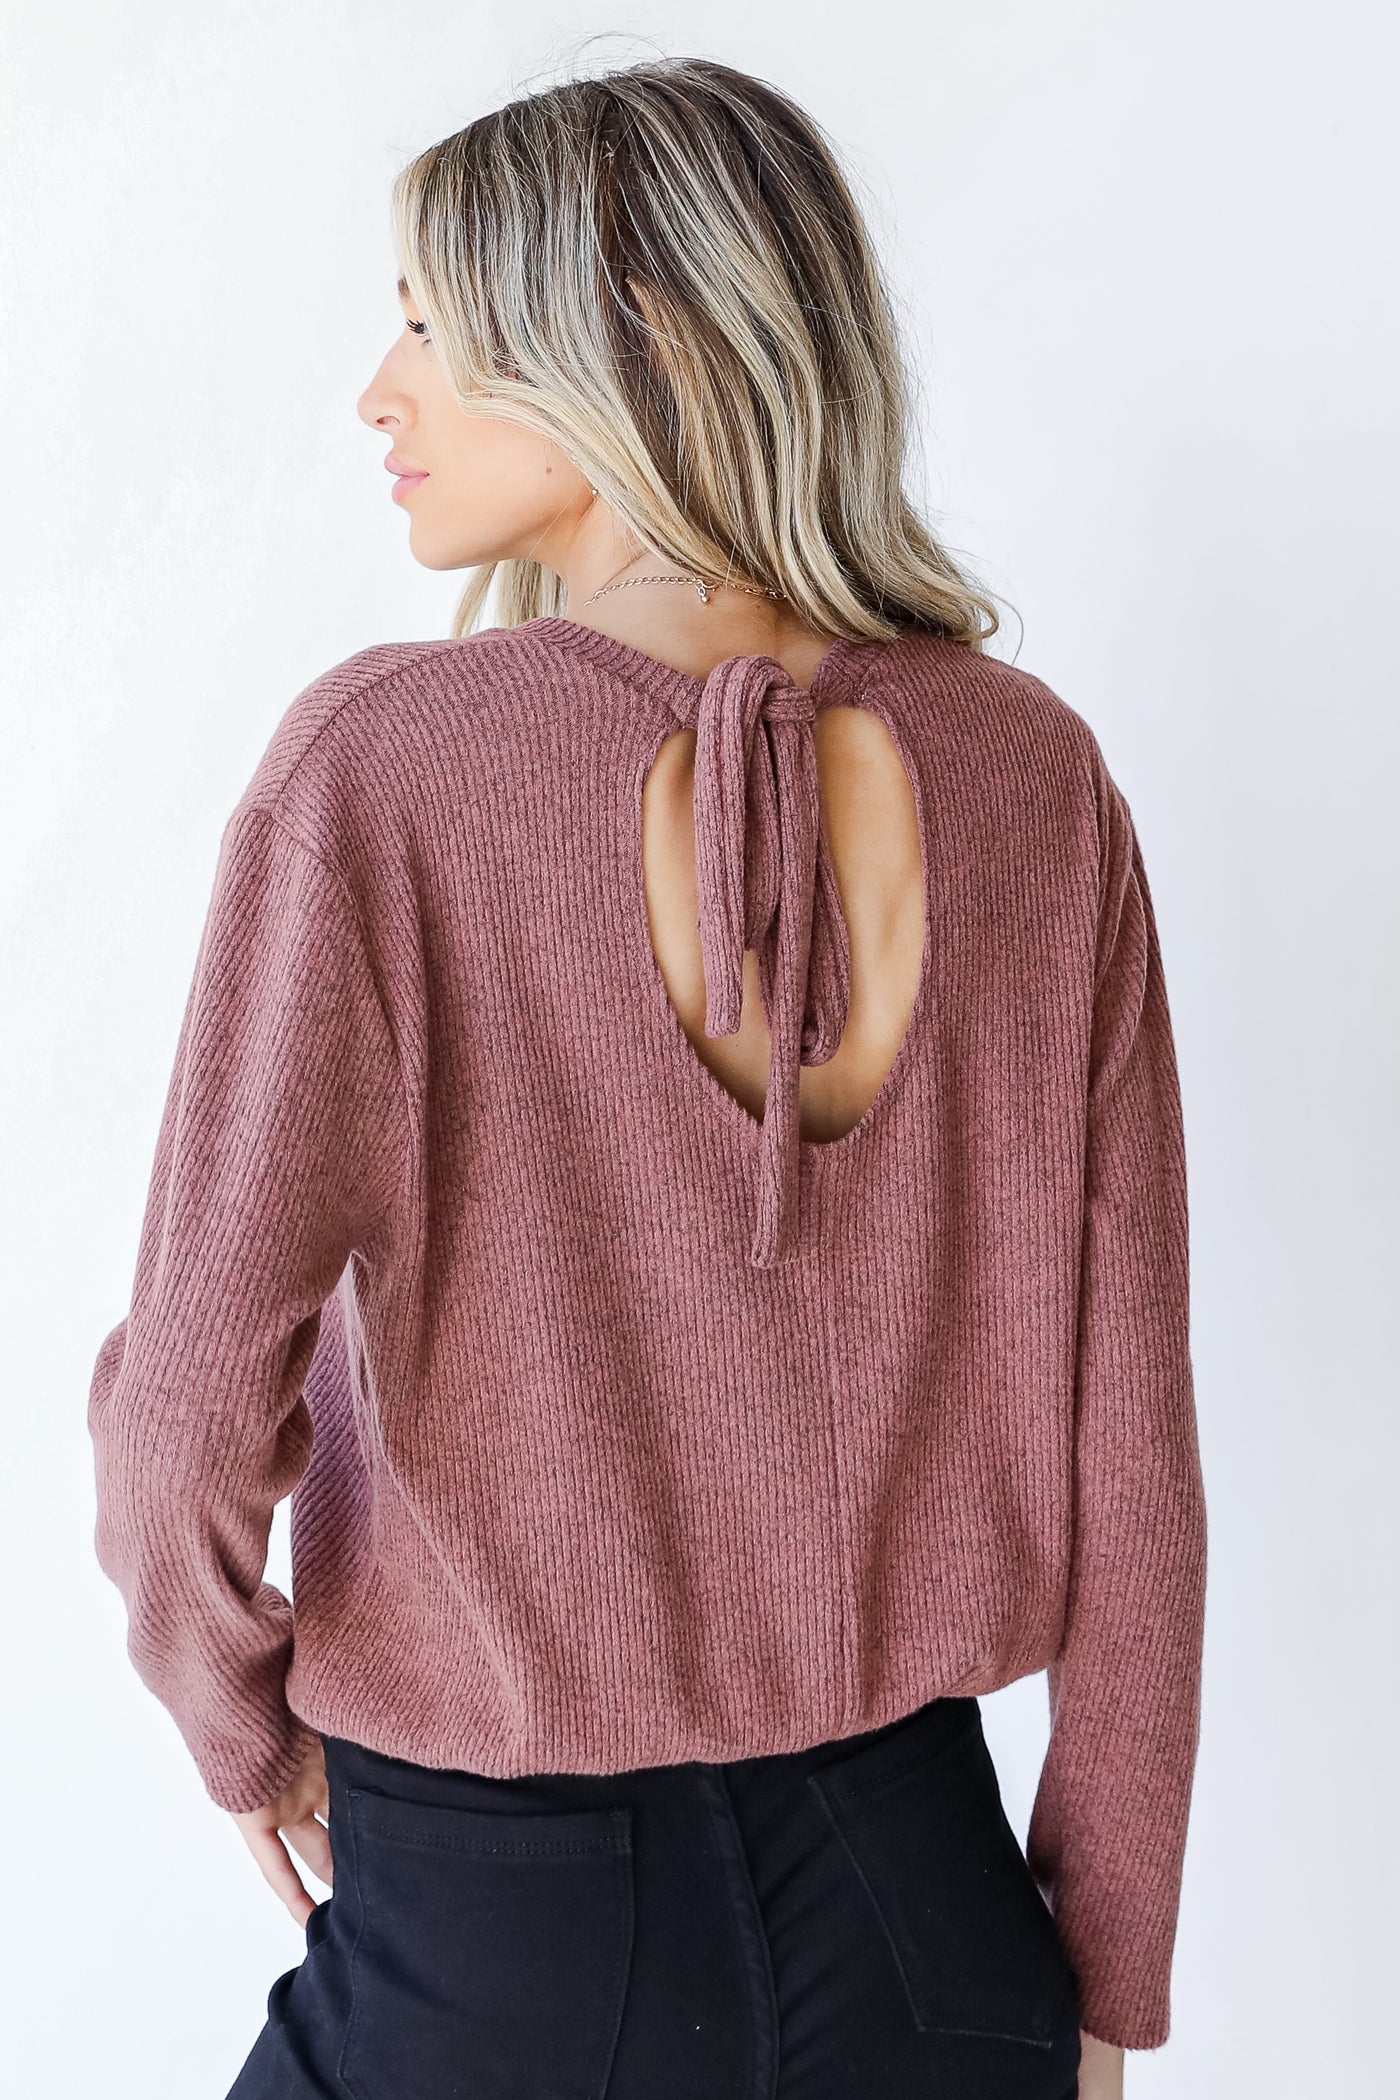 Open Back Knit Top from dress up